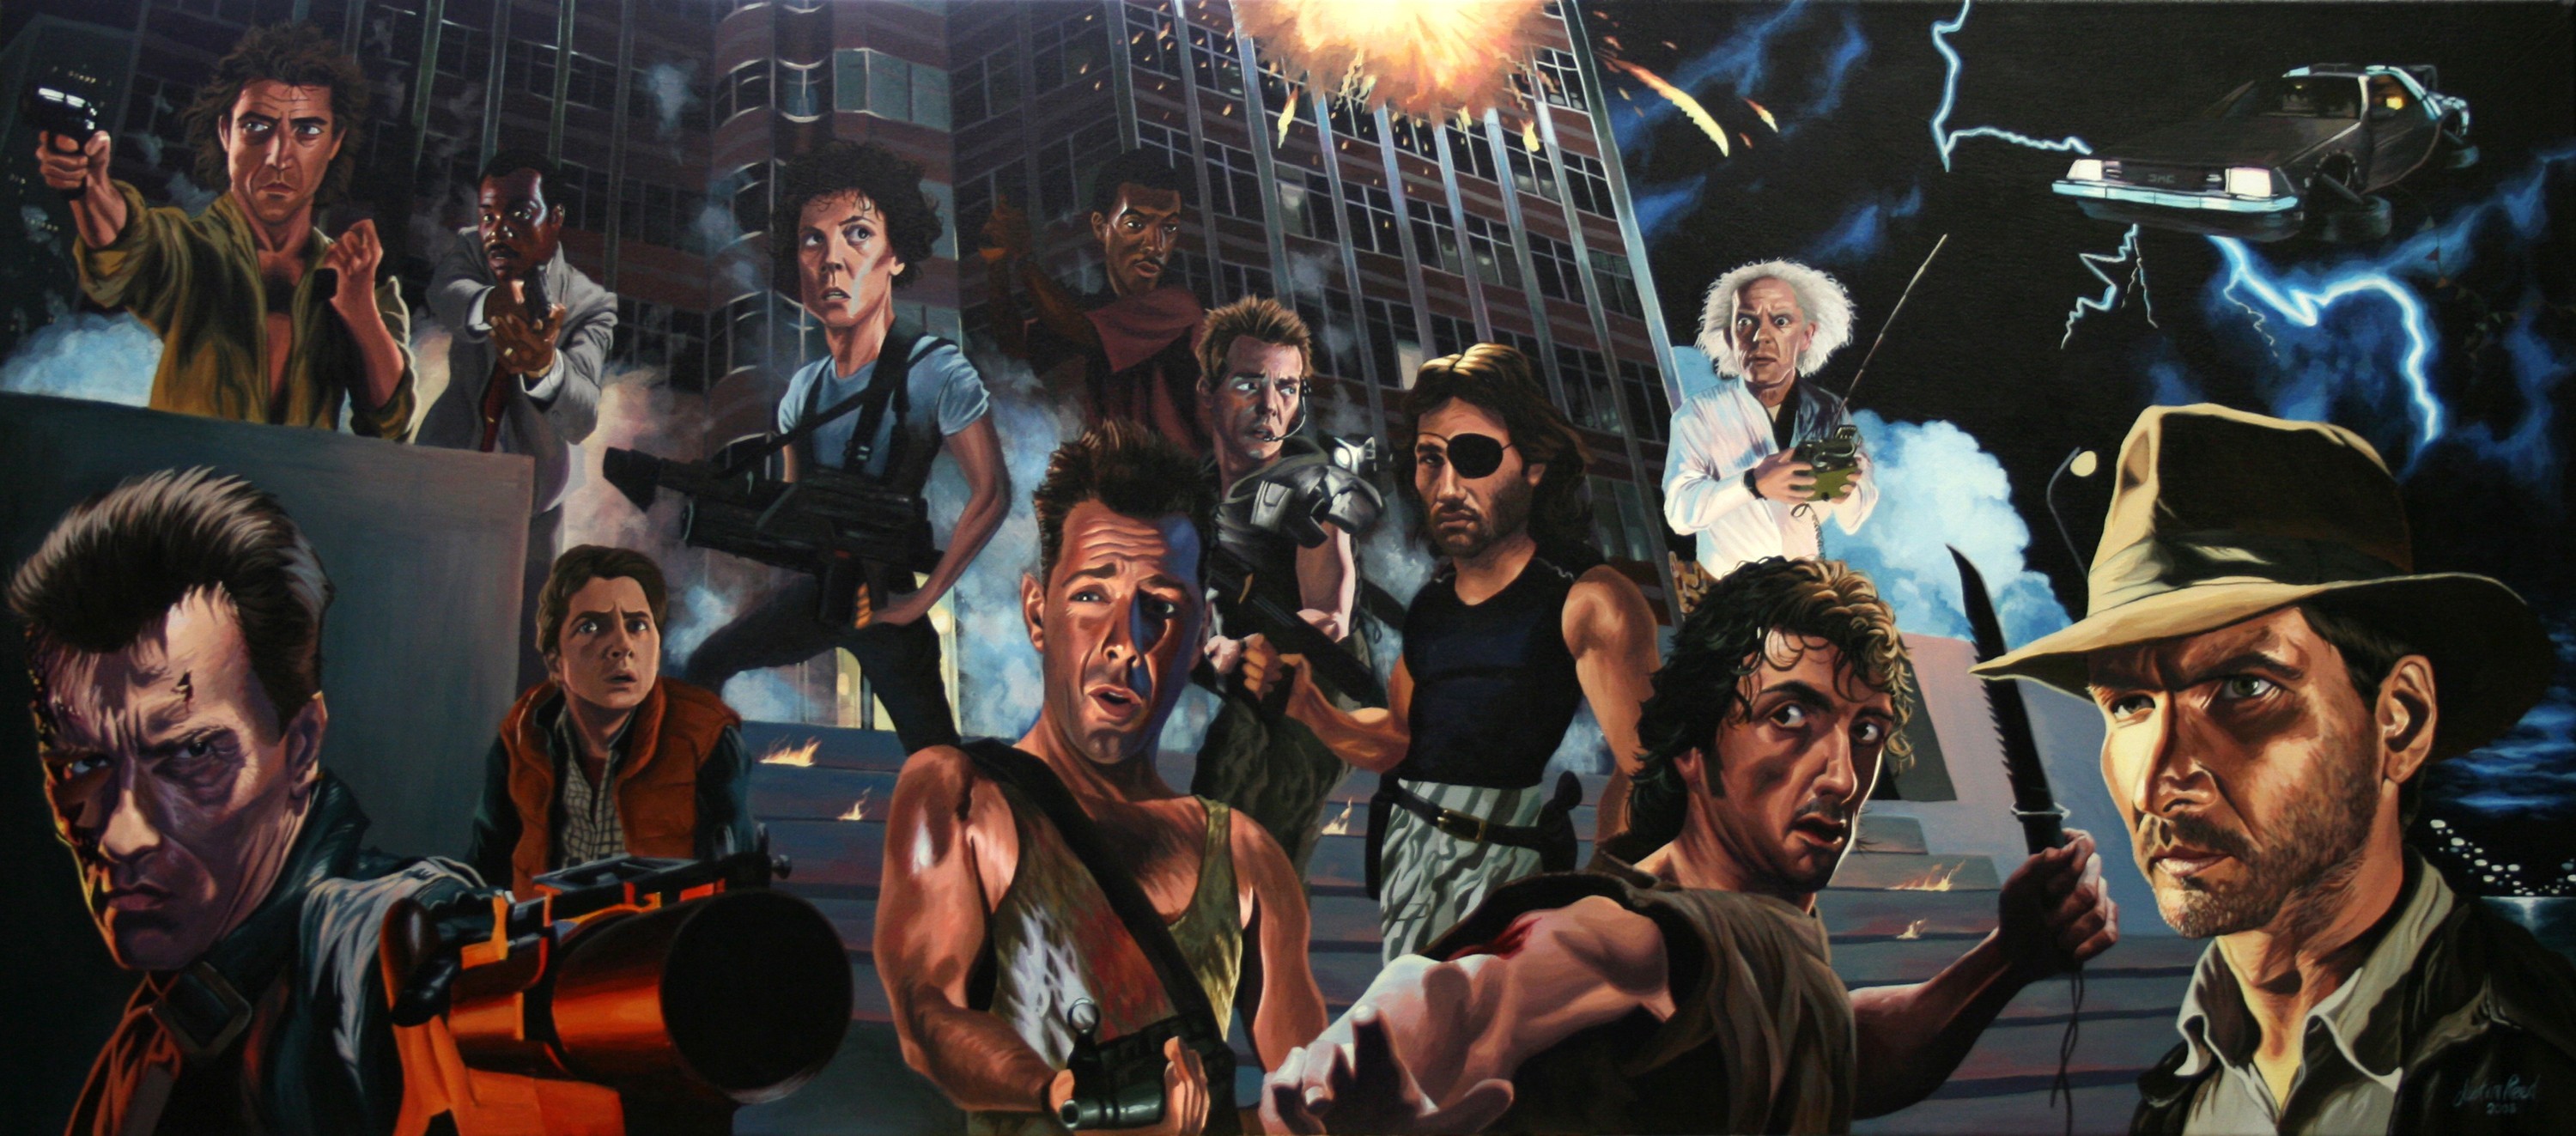 General 3000x1323 movies caricature Terminator Indiana Jones Die Hard Back to the Future Rambo Hollywood Lethal Weapon Aliens (movie) Beverly Hills Cop Terminator 2 Escape from New York crossover